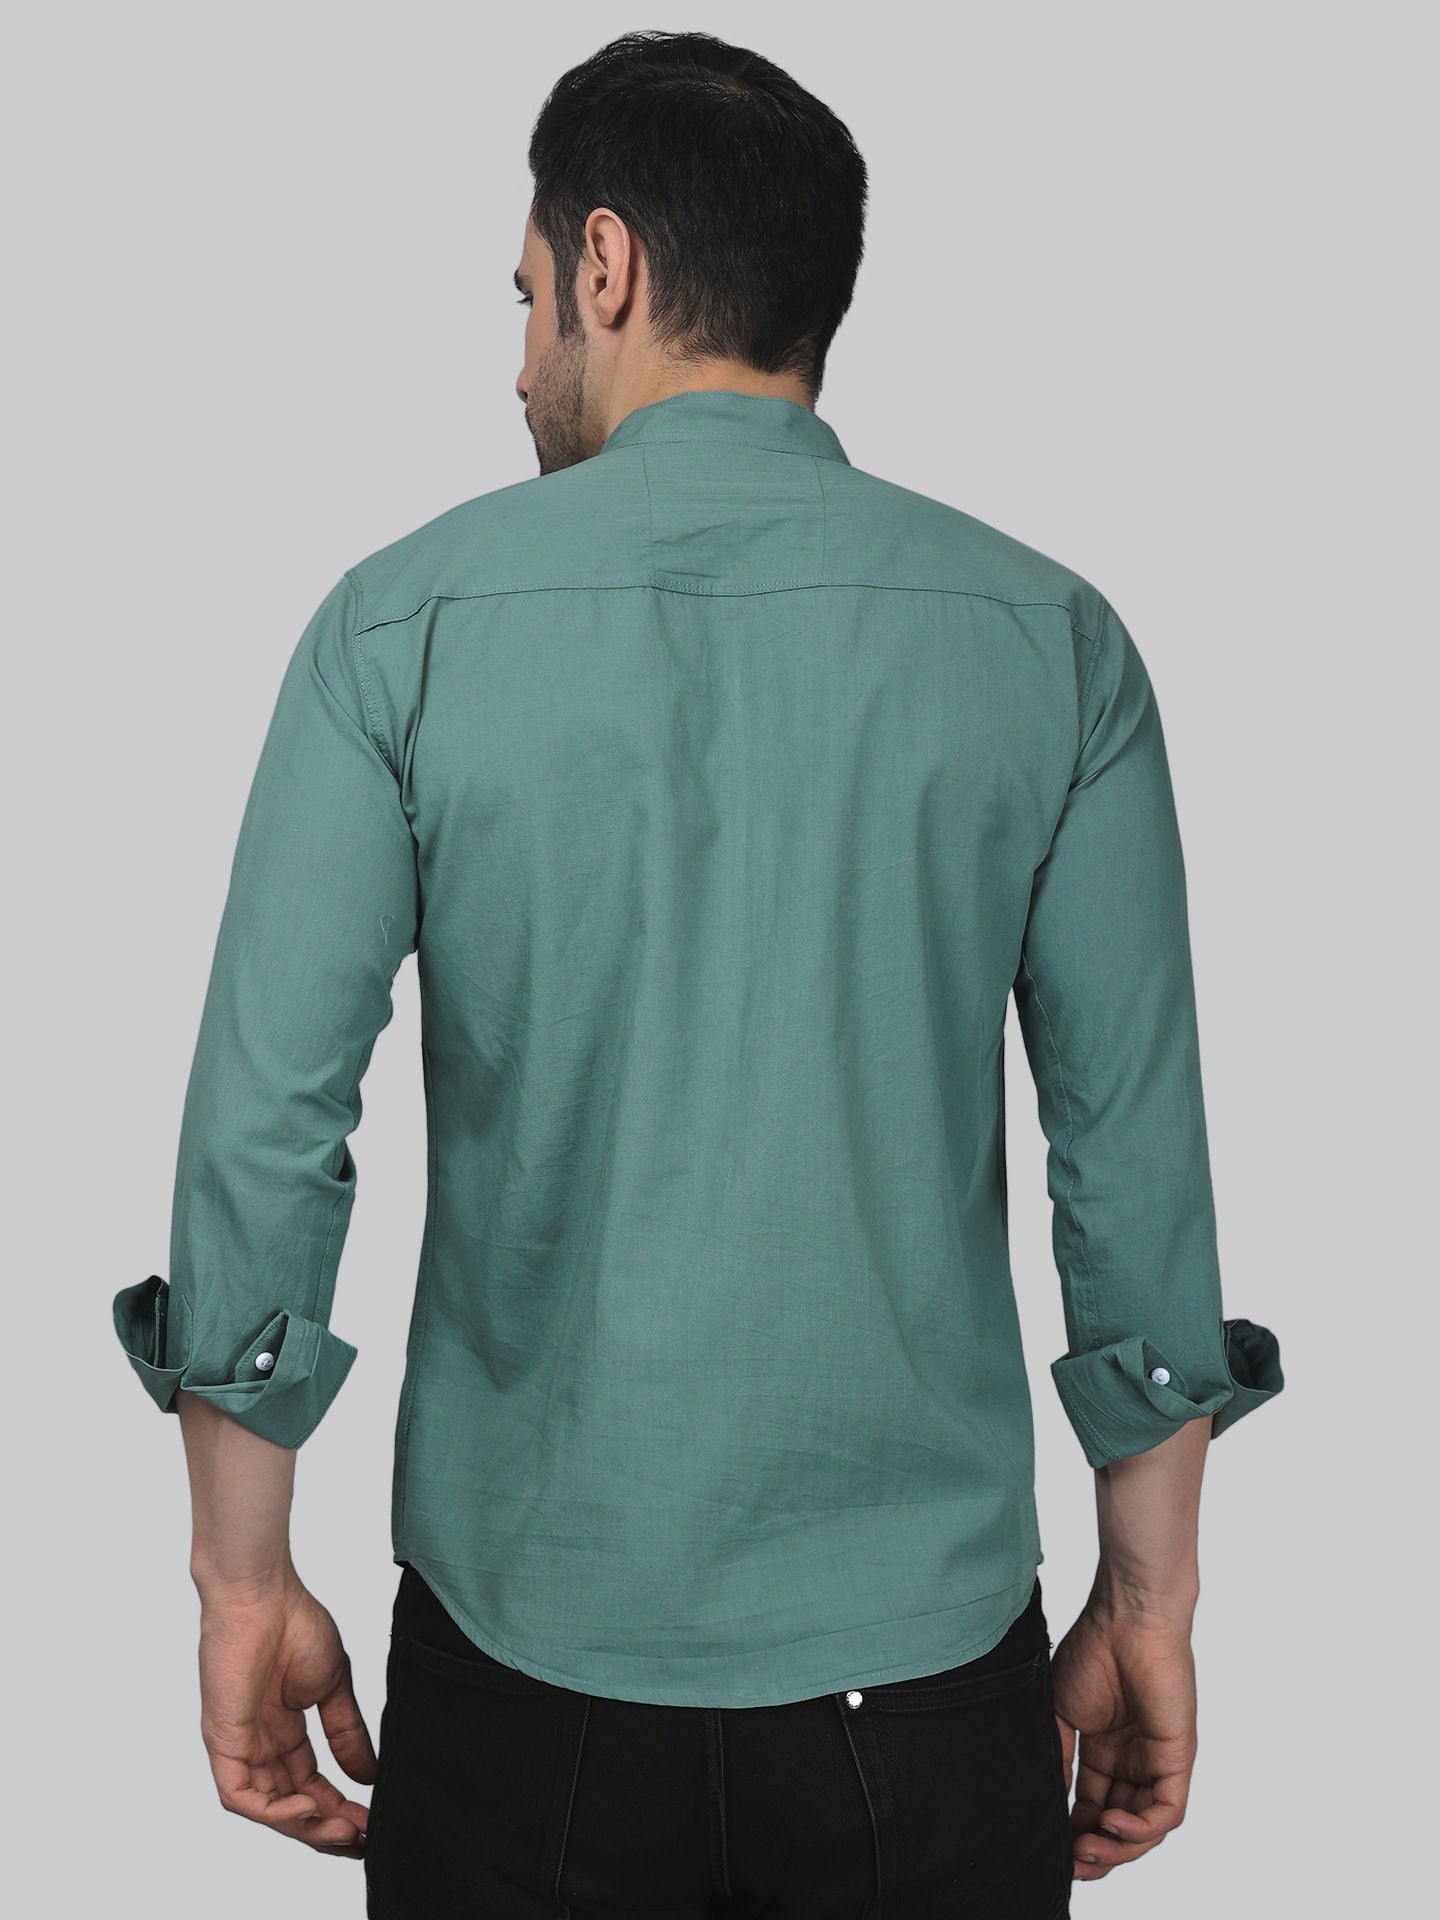 Tribal-fusion TryBuy Premium Mint-Green Cotton Casual Shirt for Men - TryBuy® USA🇺🇸